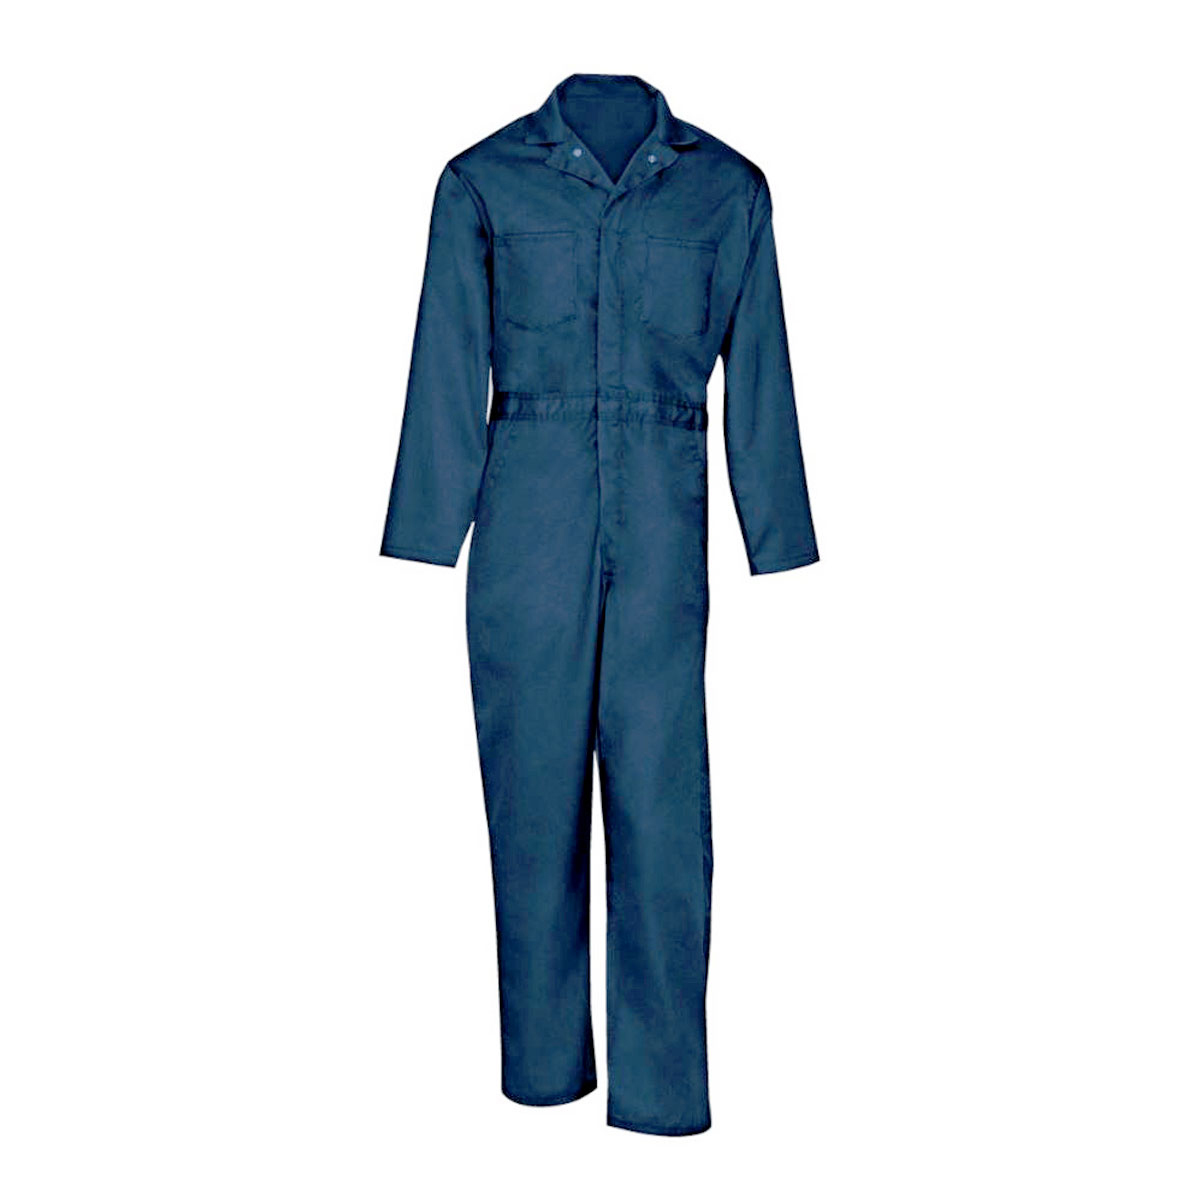 Chicago Protective Apparel 3X Blue 7.75 Ounce Polycotton Coveralls With Two Way Brass Front Zipper Closure